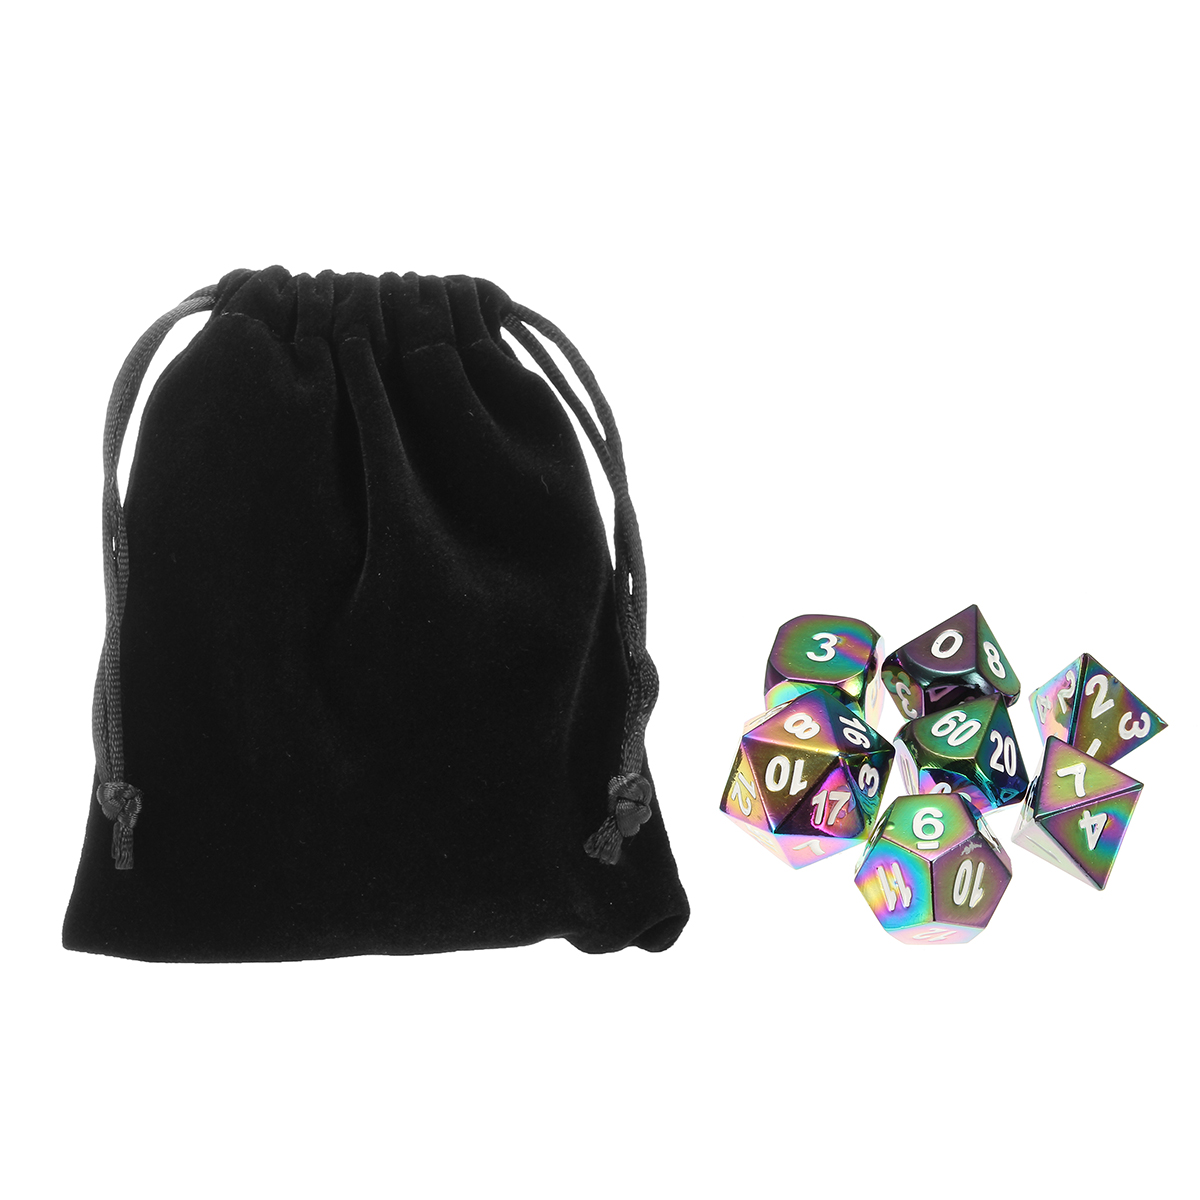 7Pcs-Colorful-Zinc-Alloy-Polyhedral-Dice-Set-Board-Game-Multisided-Dices-Gadget-1241484-4